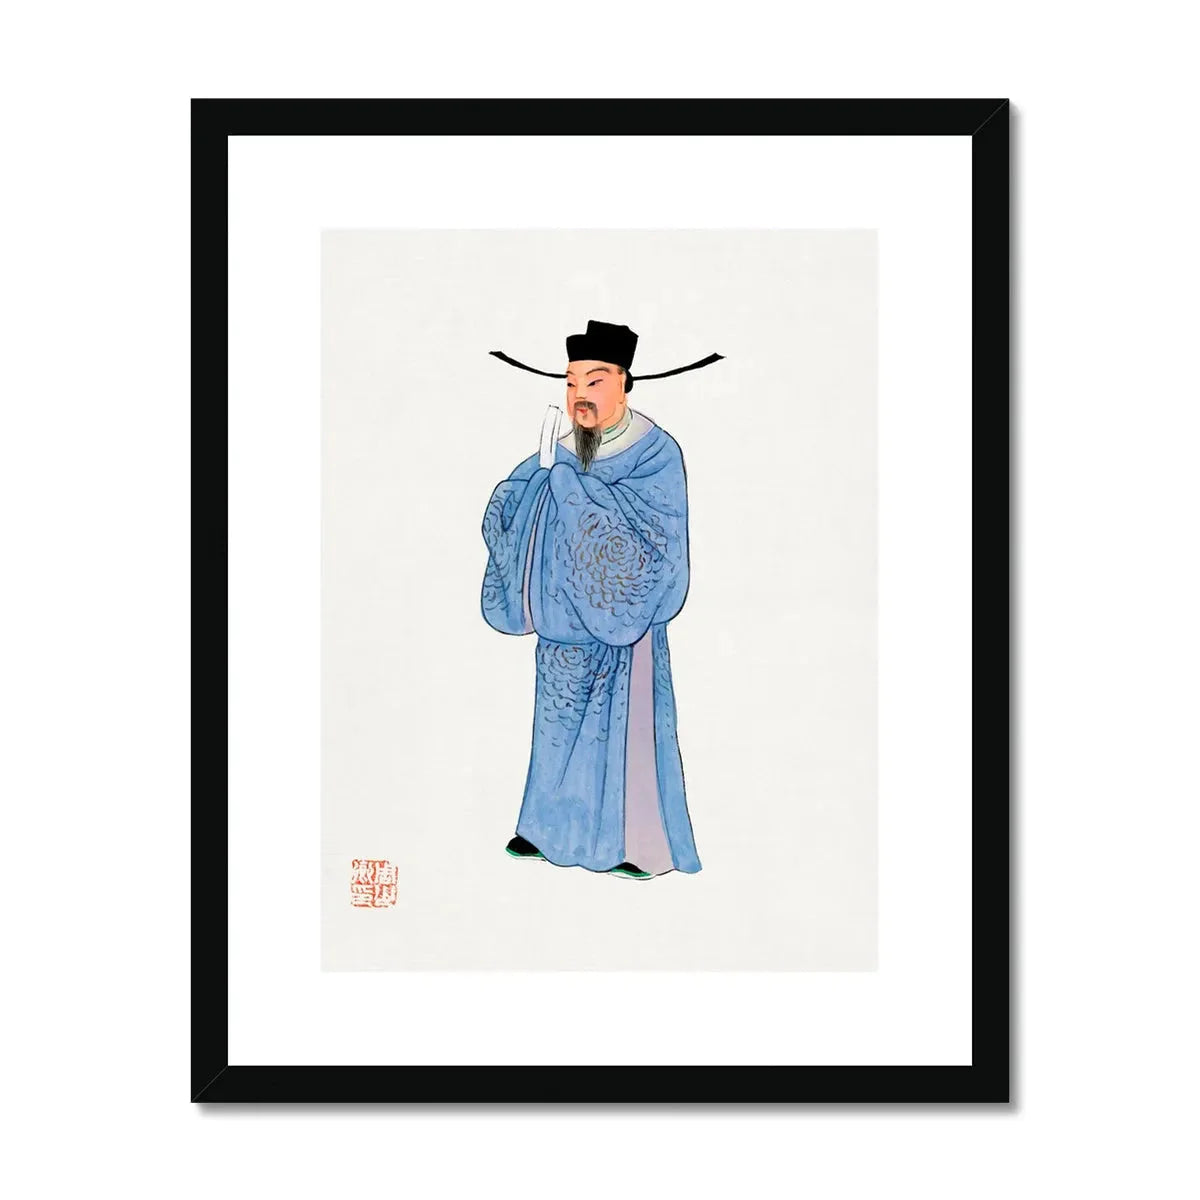 Chinese Official Framed & Mounted Print - 16’x20’ / Black Frame - Posters Prints & Visual Artwork - Aesthetic Art